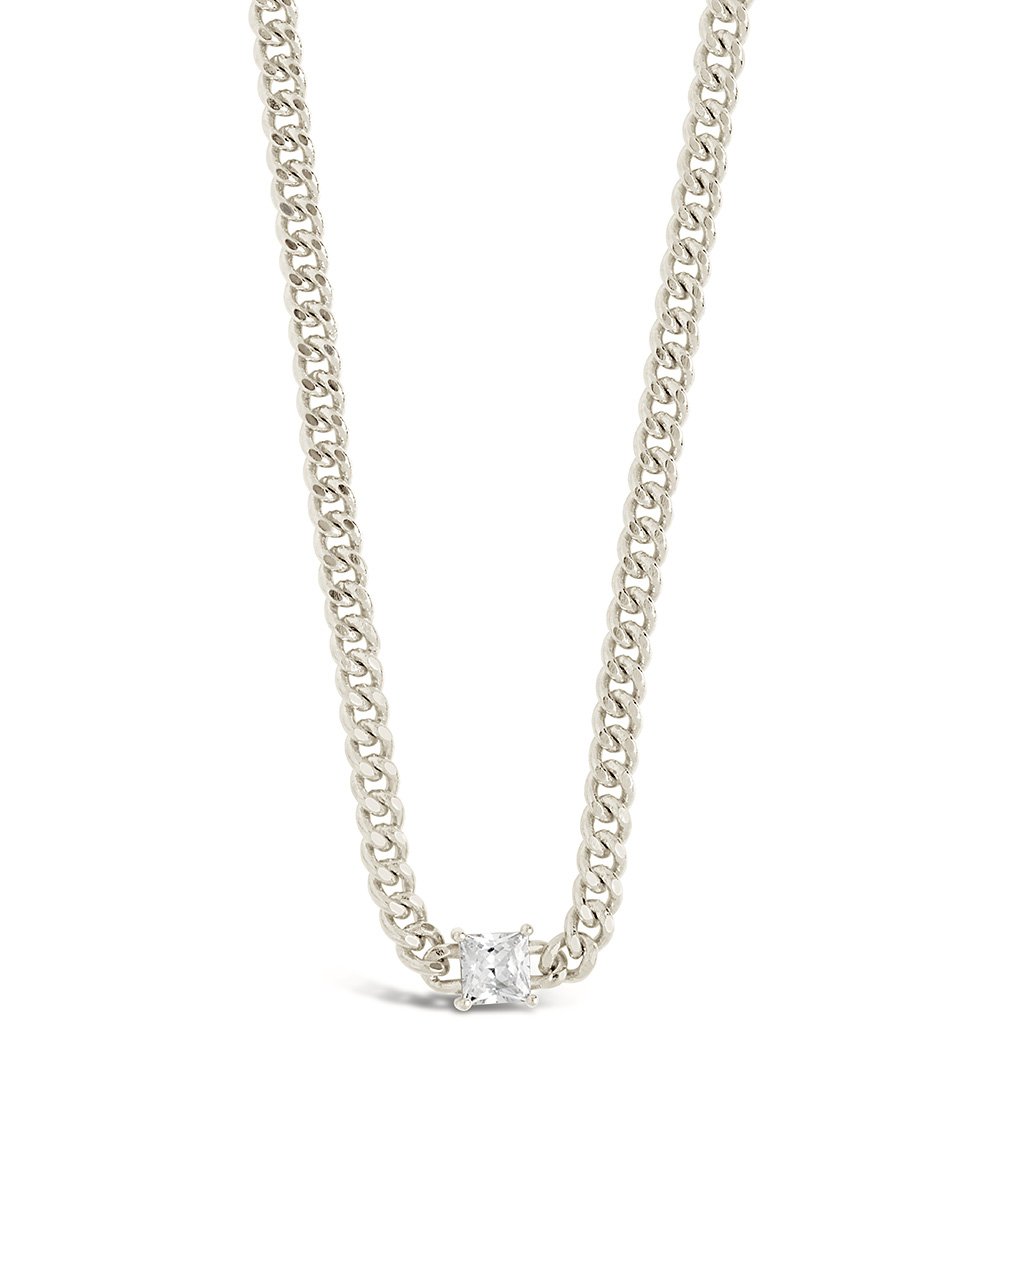 Curb Chain Necklace with Stationed CZ Necklace Sterling Forever Silver 